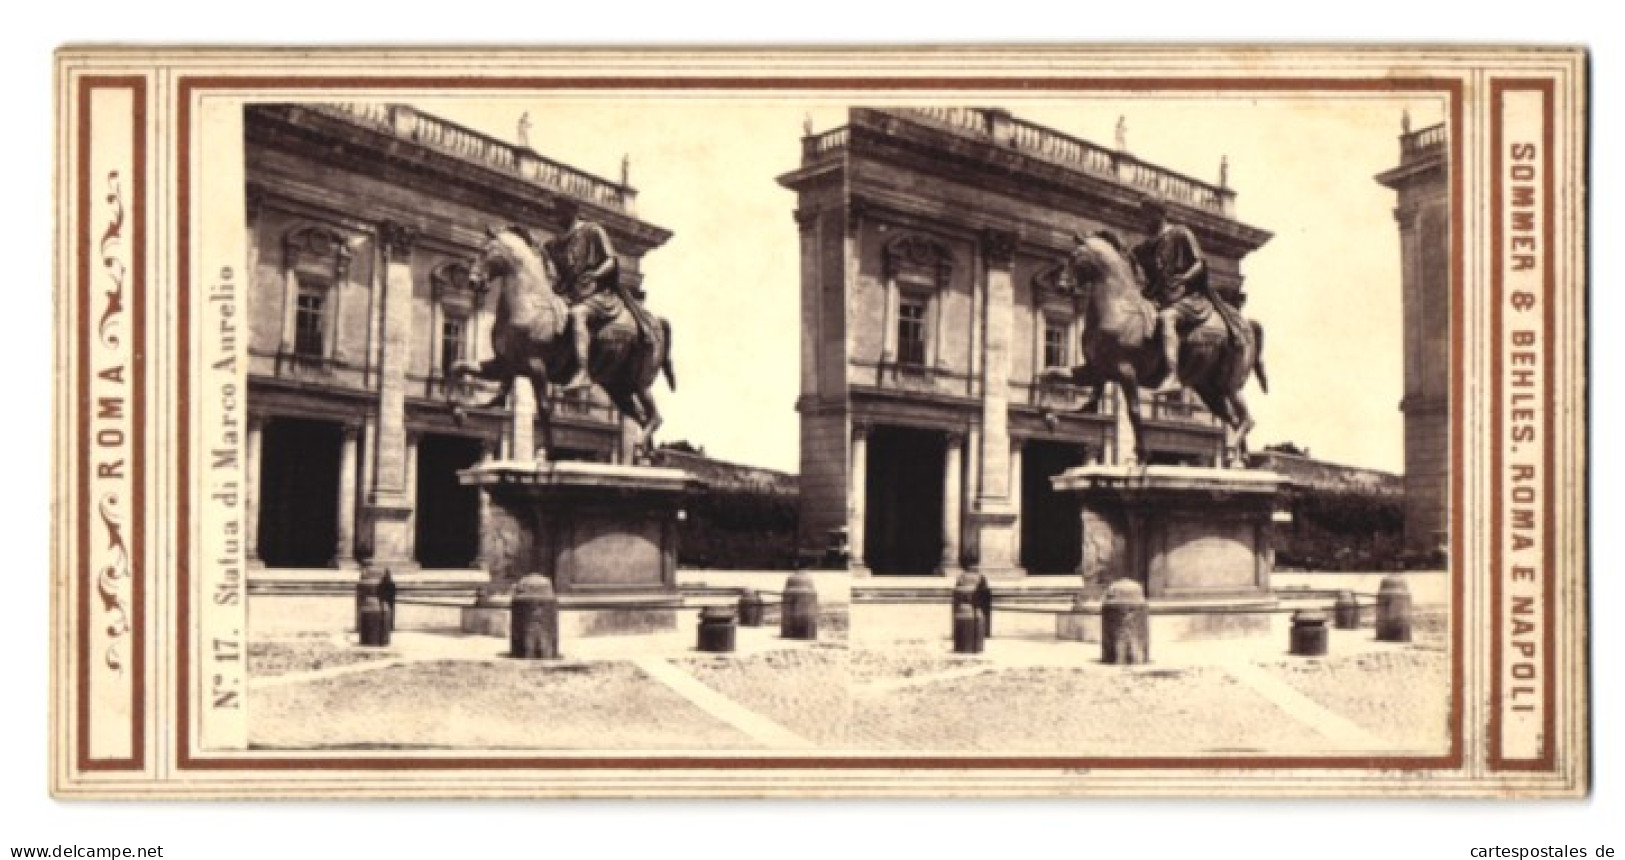 Stereo-Foto Sommer & Behles, Roma, Ansicht Roma, Statue Di Marco Aurelio  - Stereo-Photographie